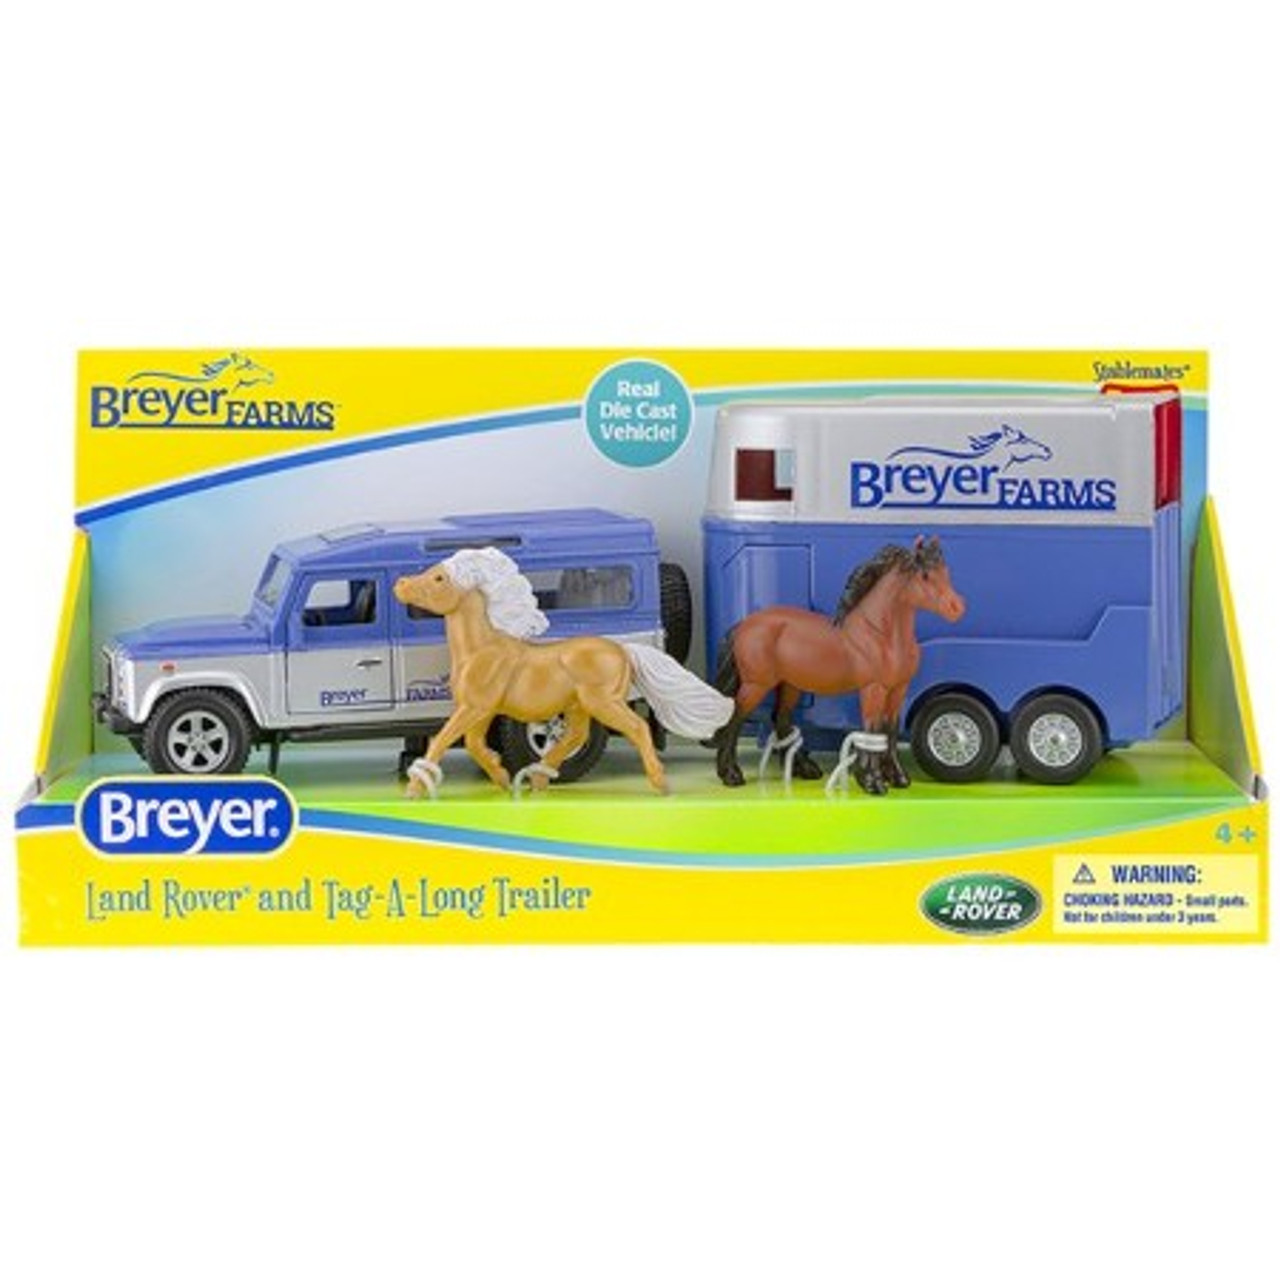 BREYER FARMS VEHICLE AND TRAIL